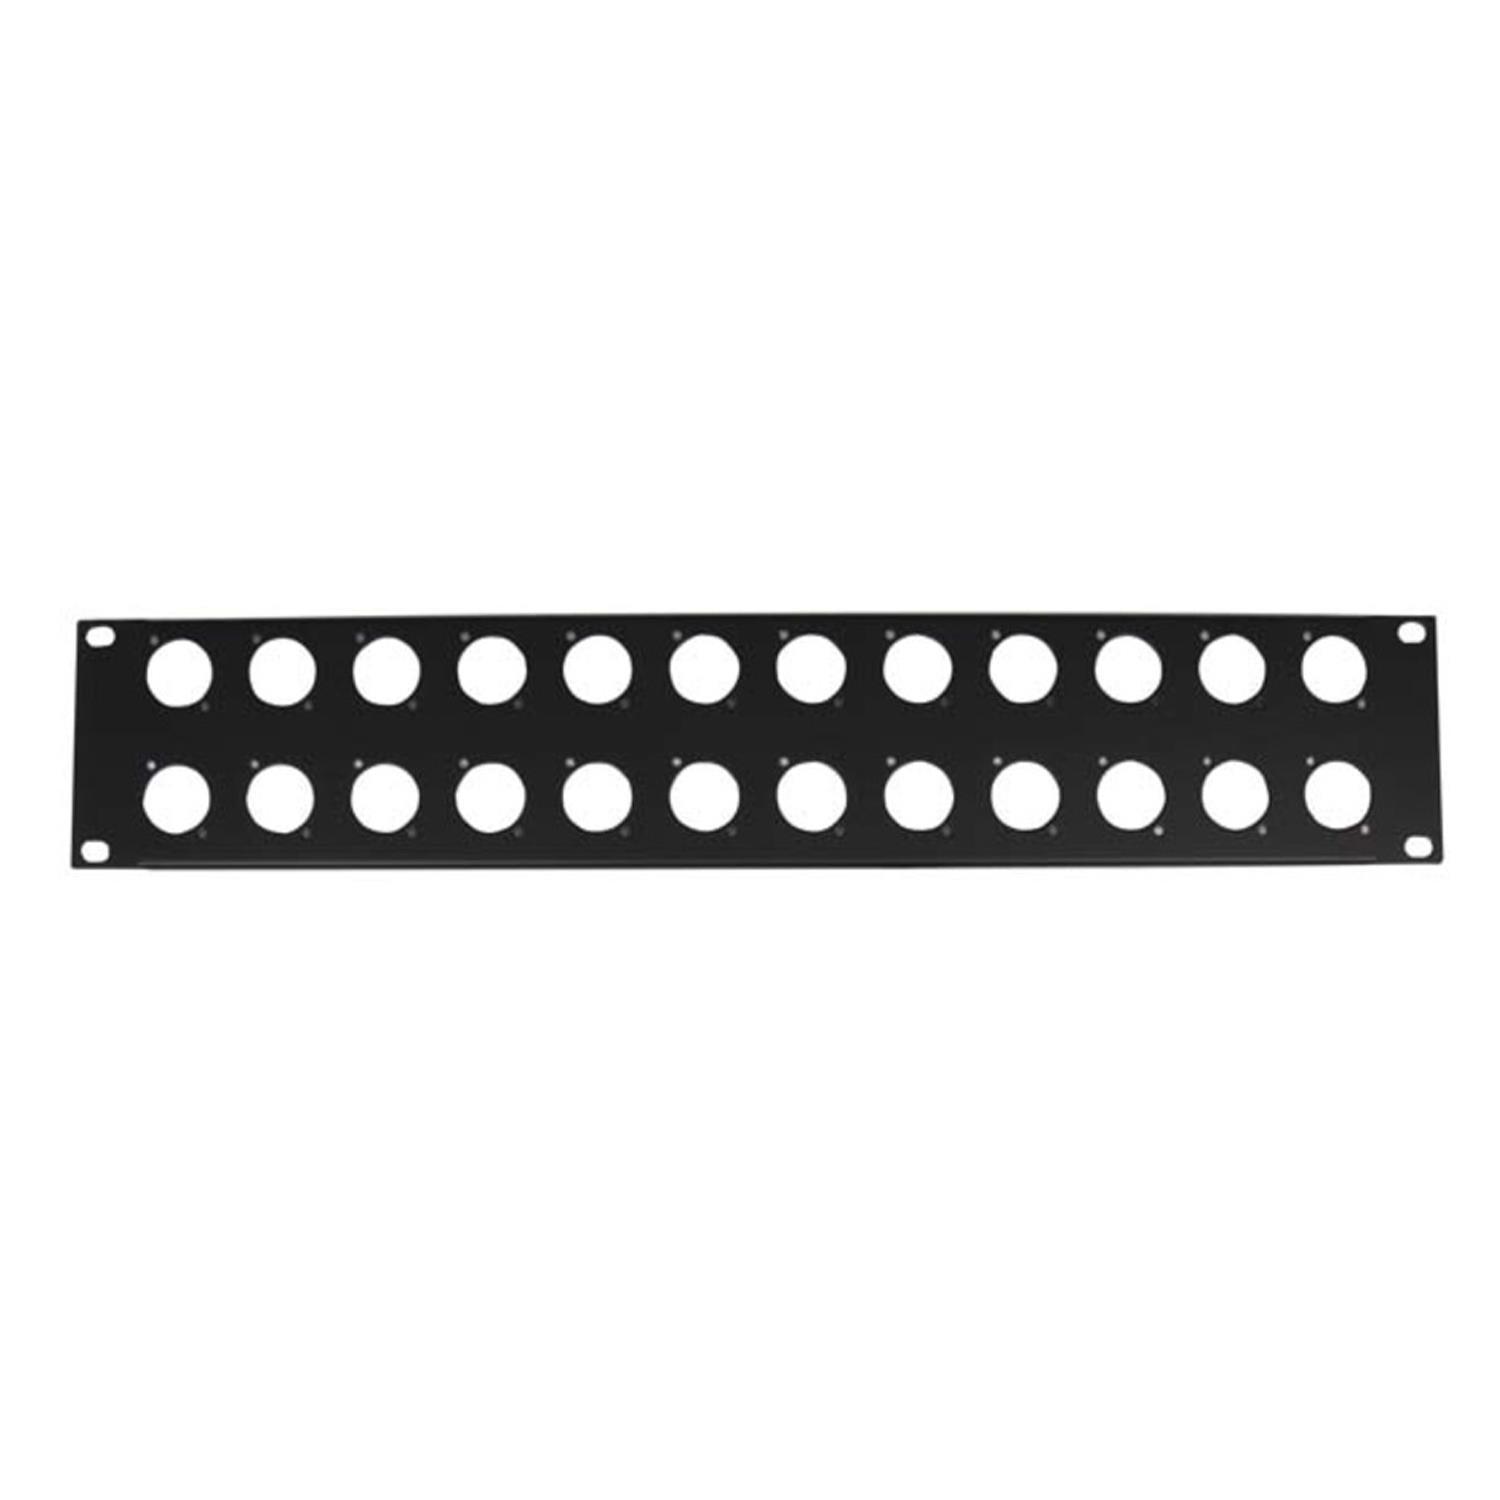 Stagecore 19" 2U 24 Hole Punched Connector Patch Panel for D Series Connectors - DY Pro Audio